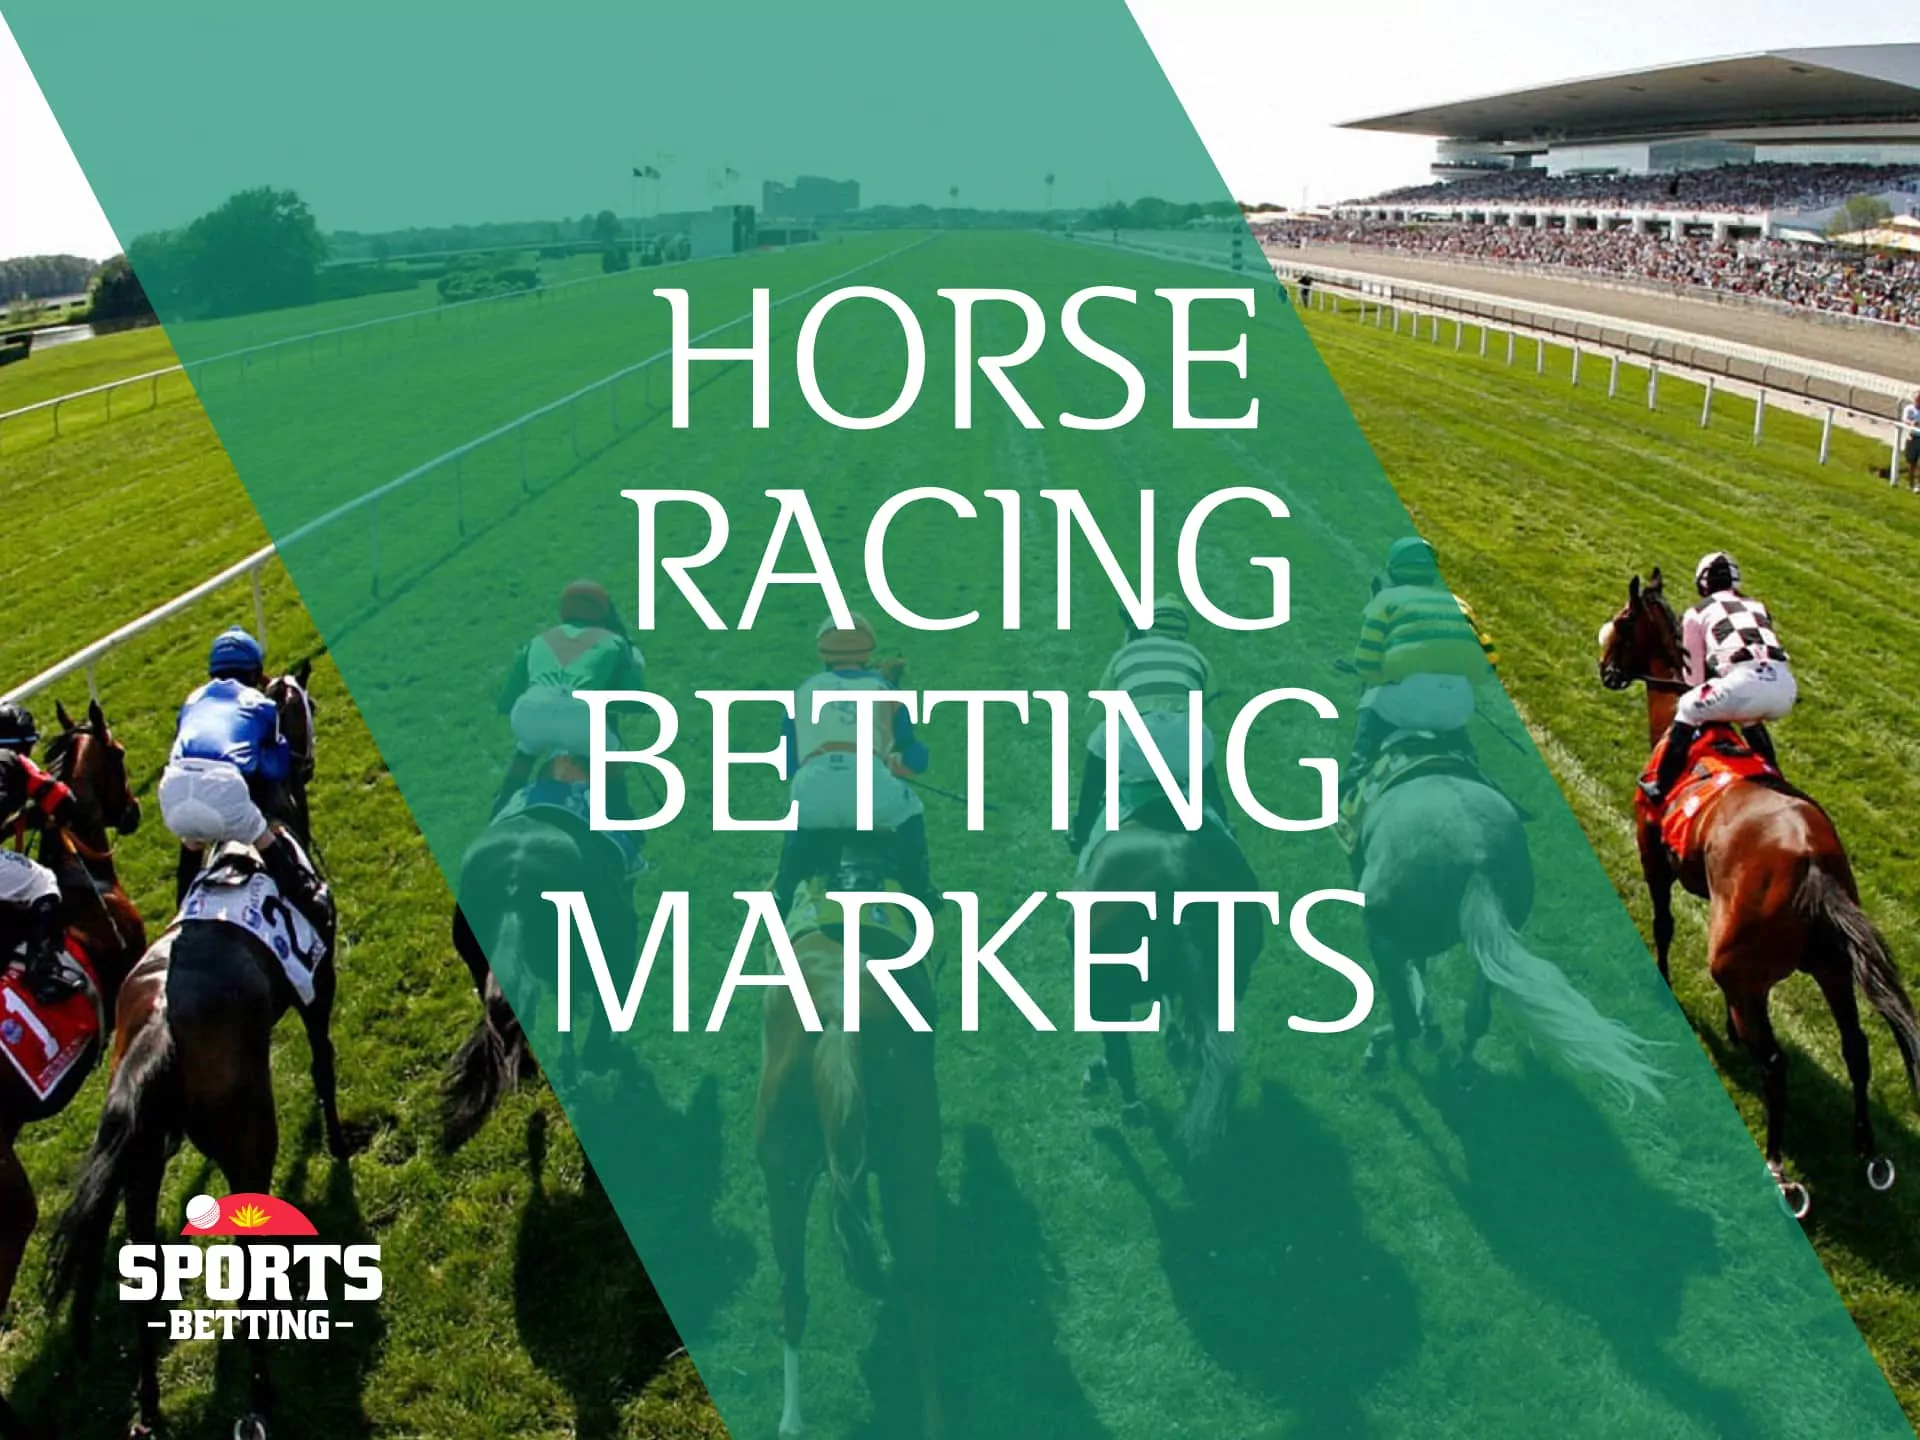 Bookmakers offer a variety of horse racing betting options to their consumers.